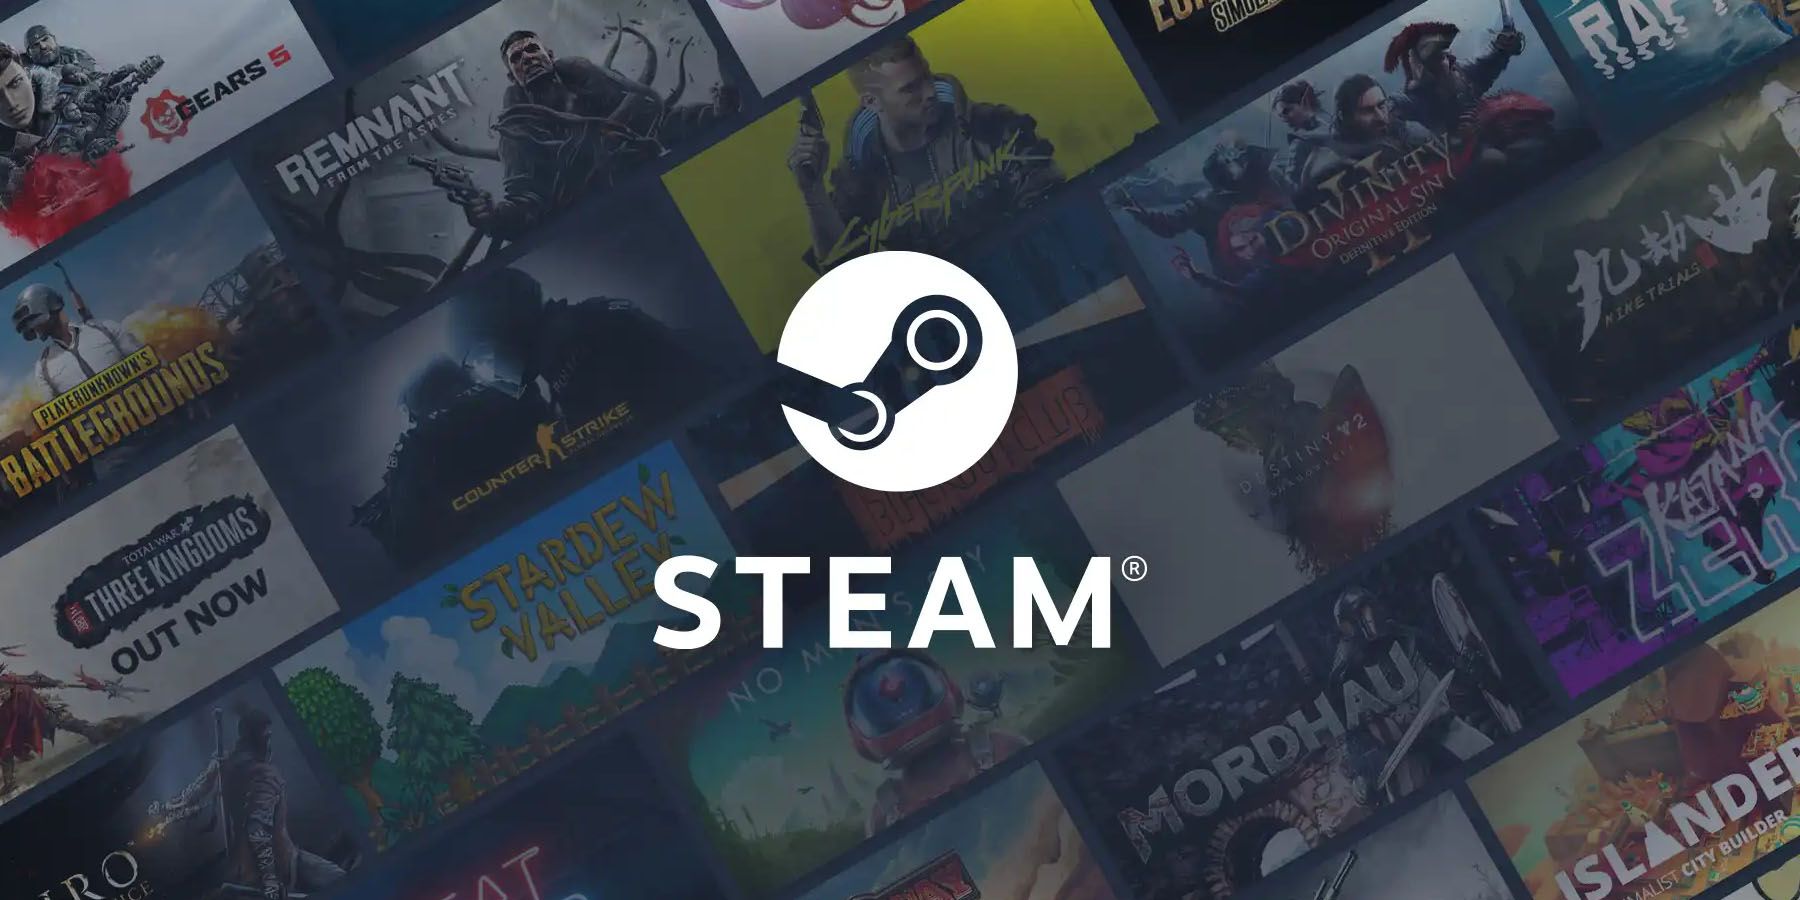 An image of a white Steam logo behind a collection of games available on the platform.